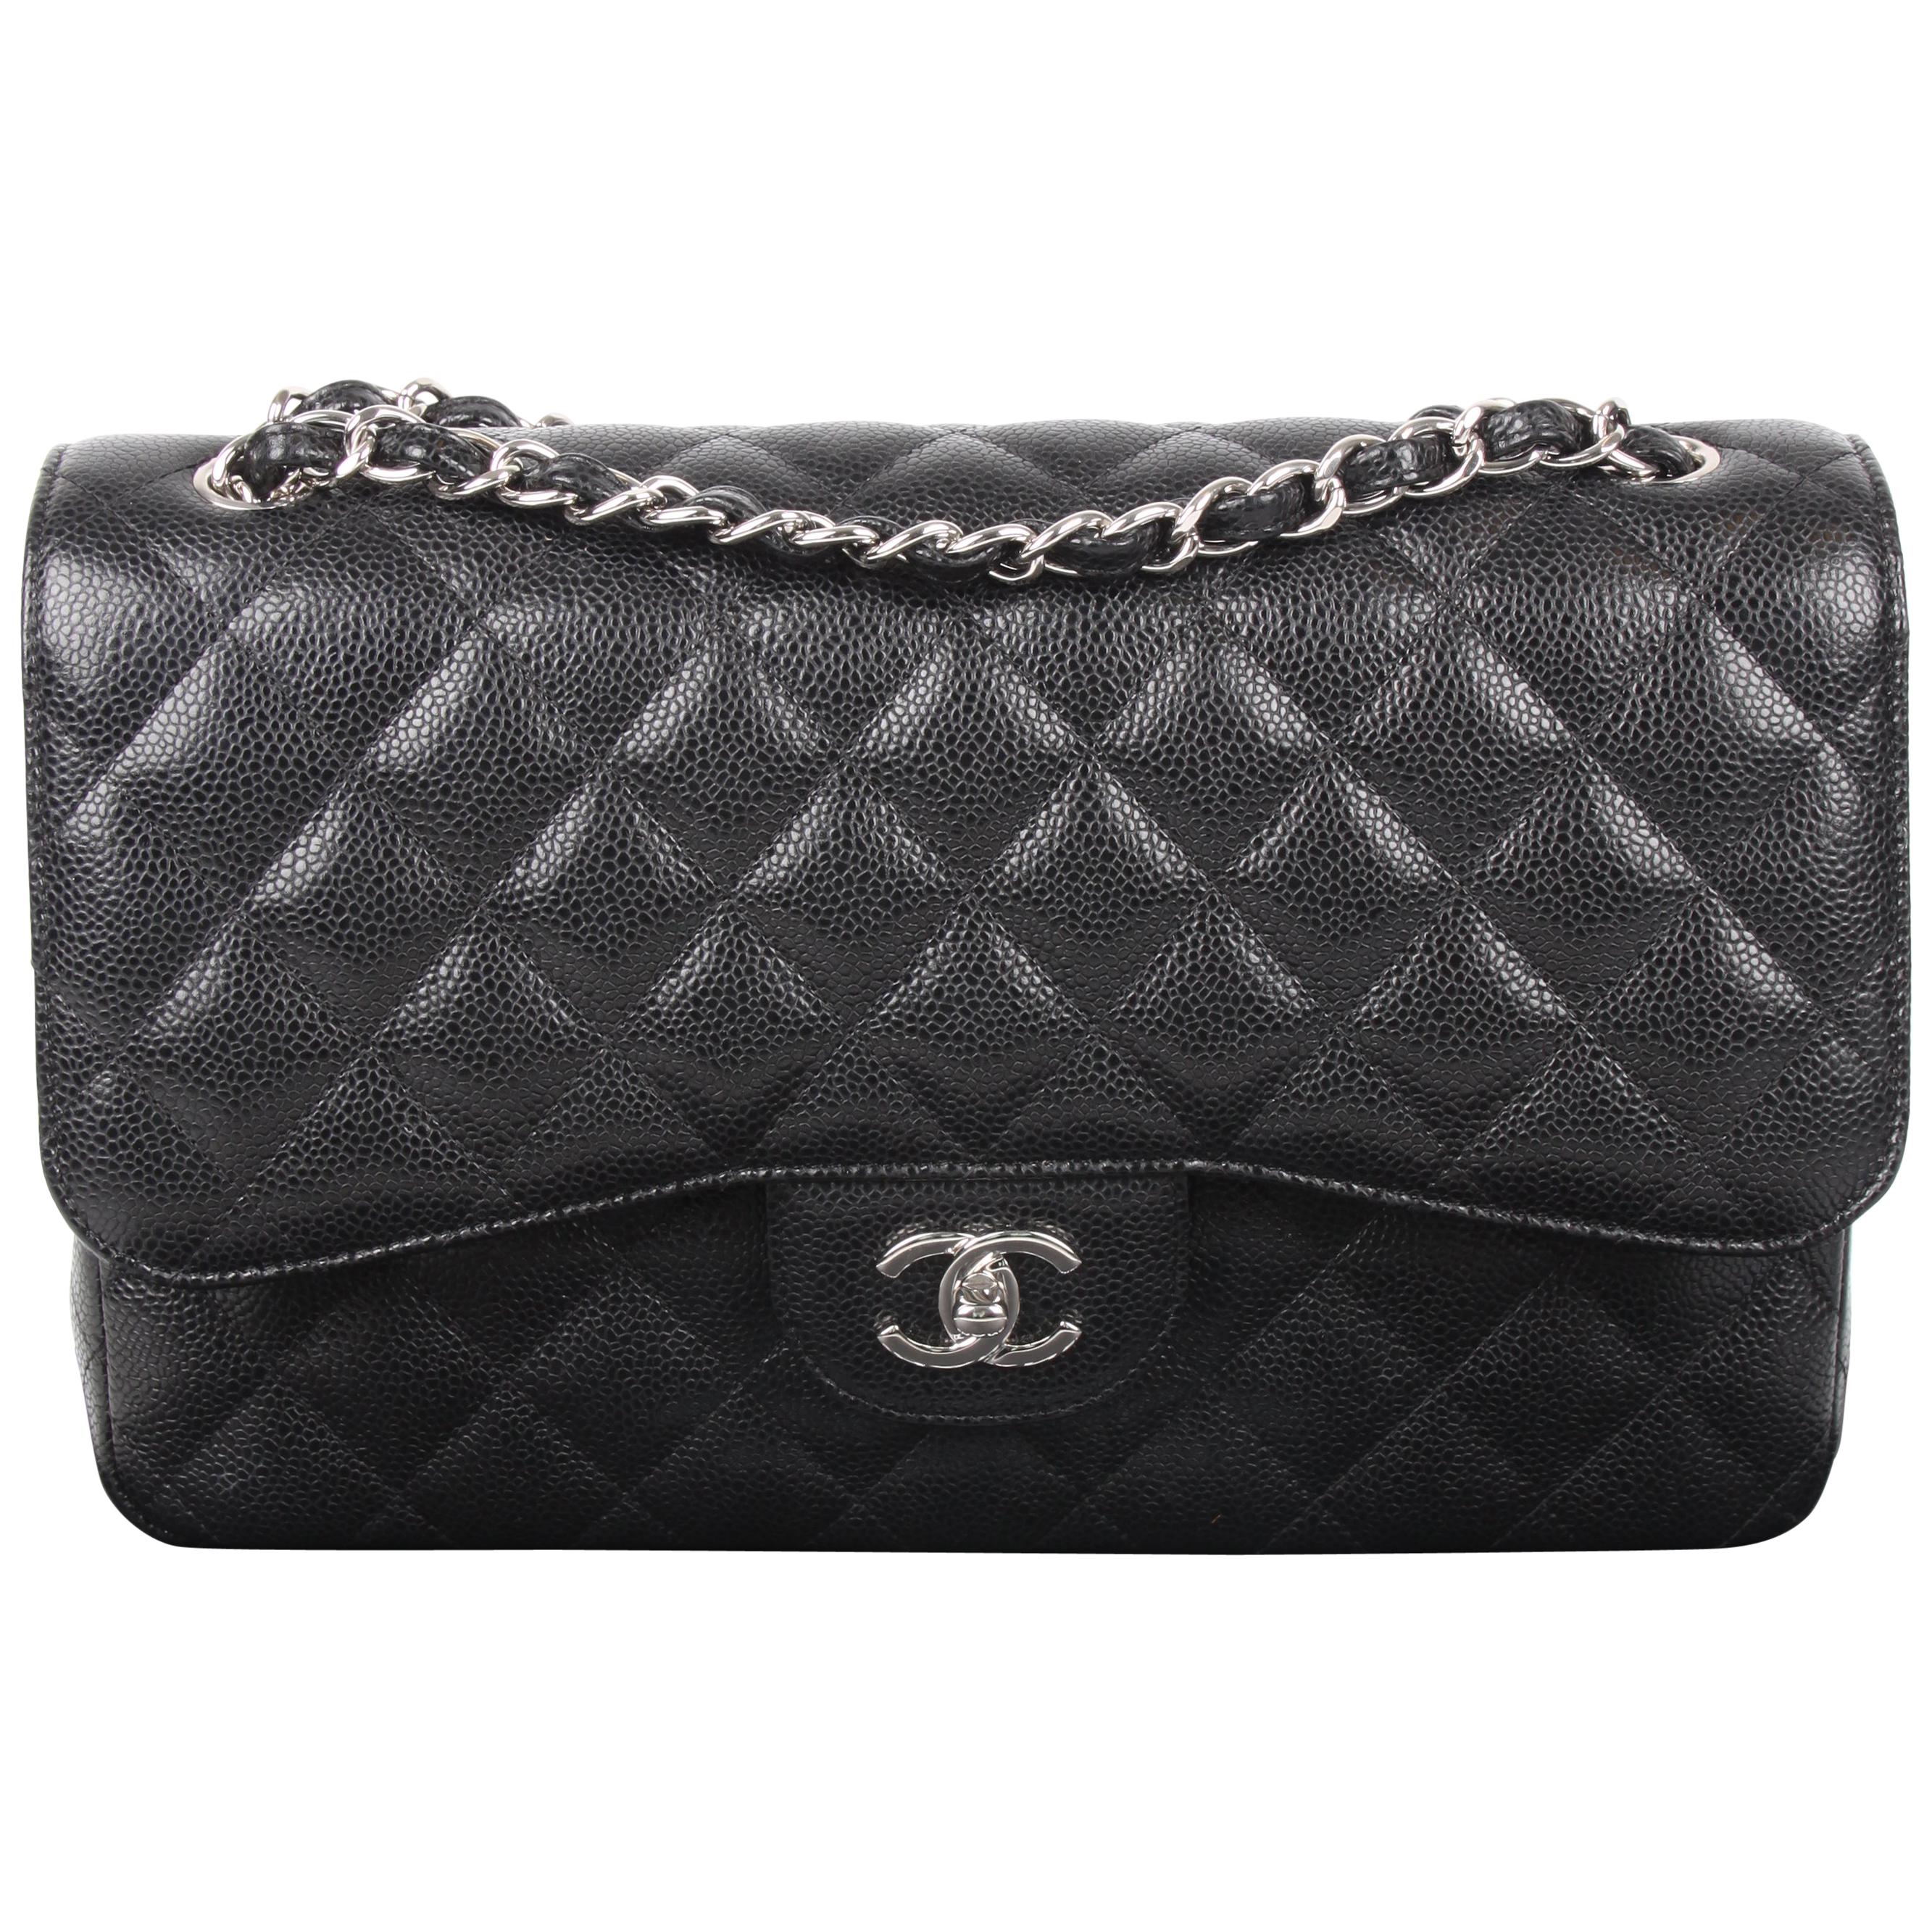   Chanel 2.55 Timeless 2018 black caviar leather/silver   